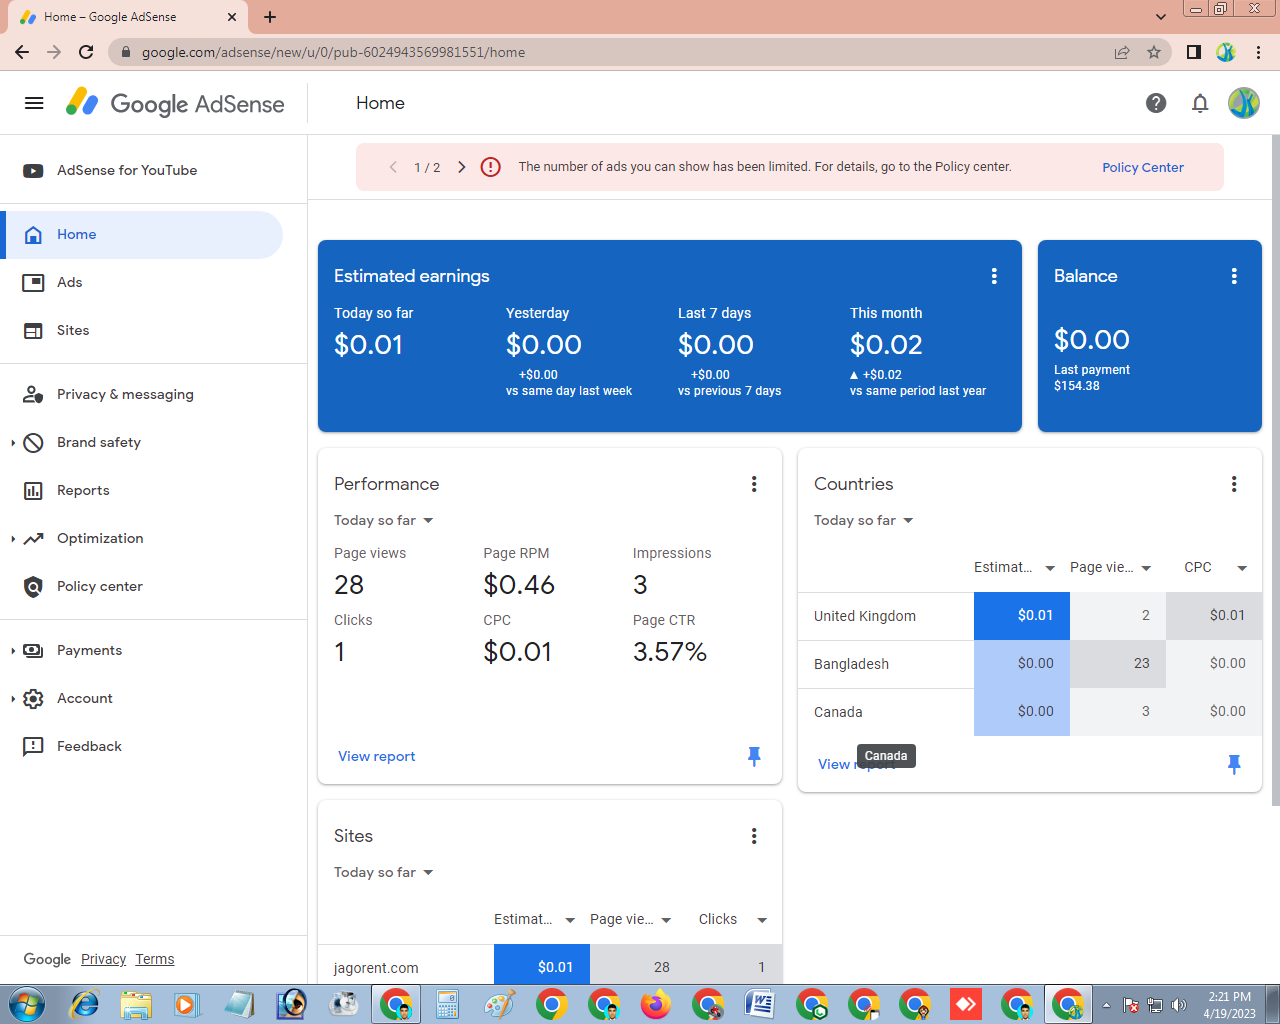 86524SELL ANY COUNTRY ADSENSE ACCOUNT ONLY LIKE Bangladesh,USA,UK,CANADA,Other COUNTRY